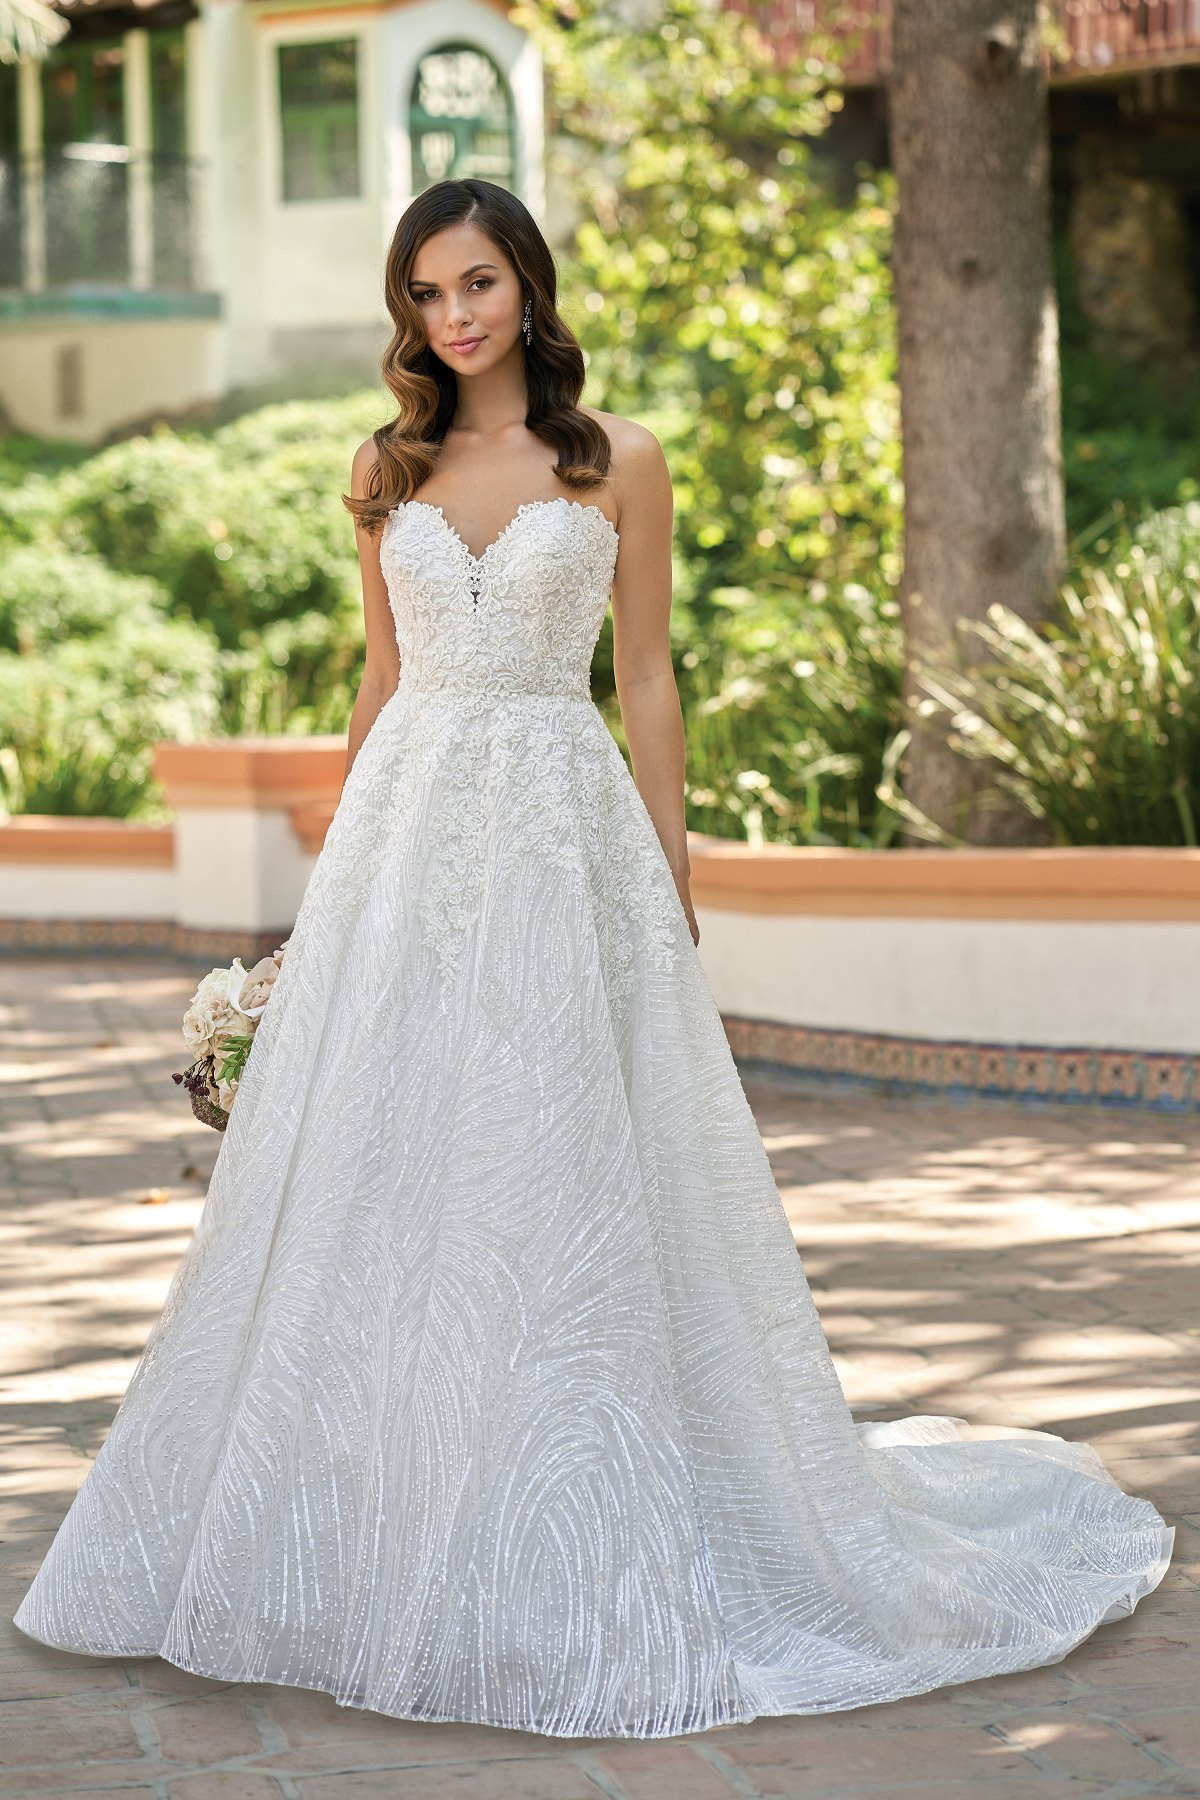 Lace Sweetheart Wedding Dress
 T Beautiful Embroidered Lace Strapless Wedding Dress